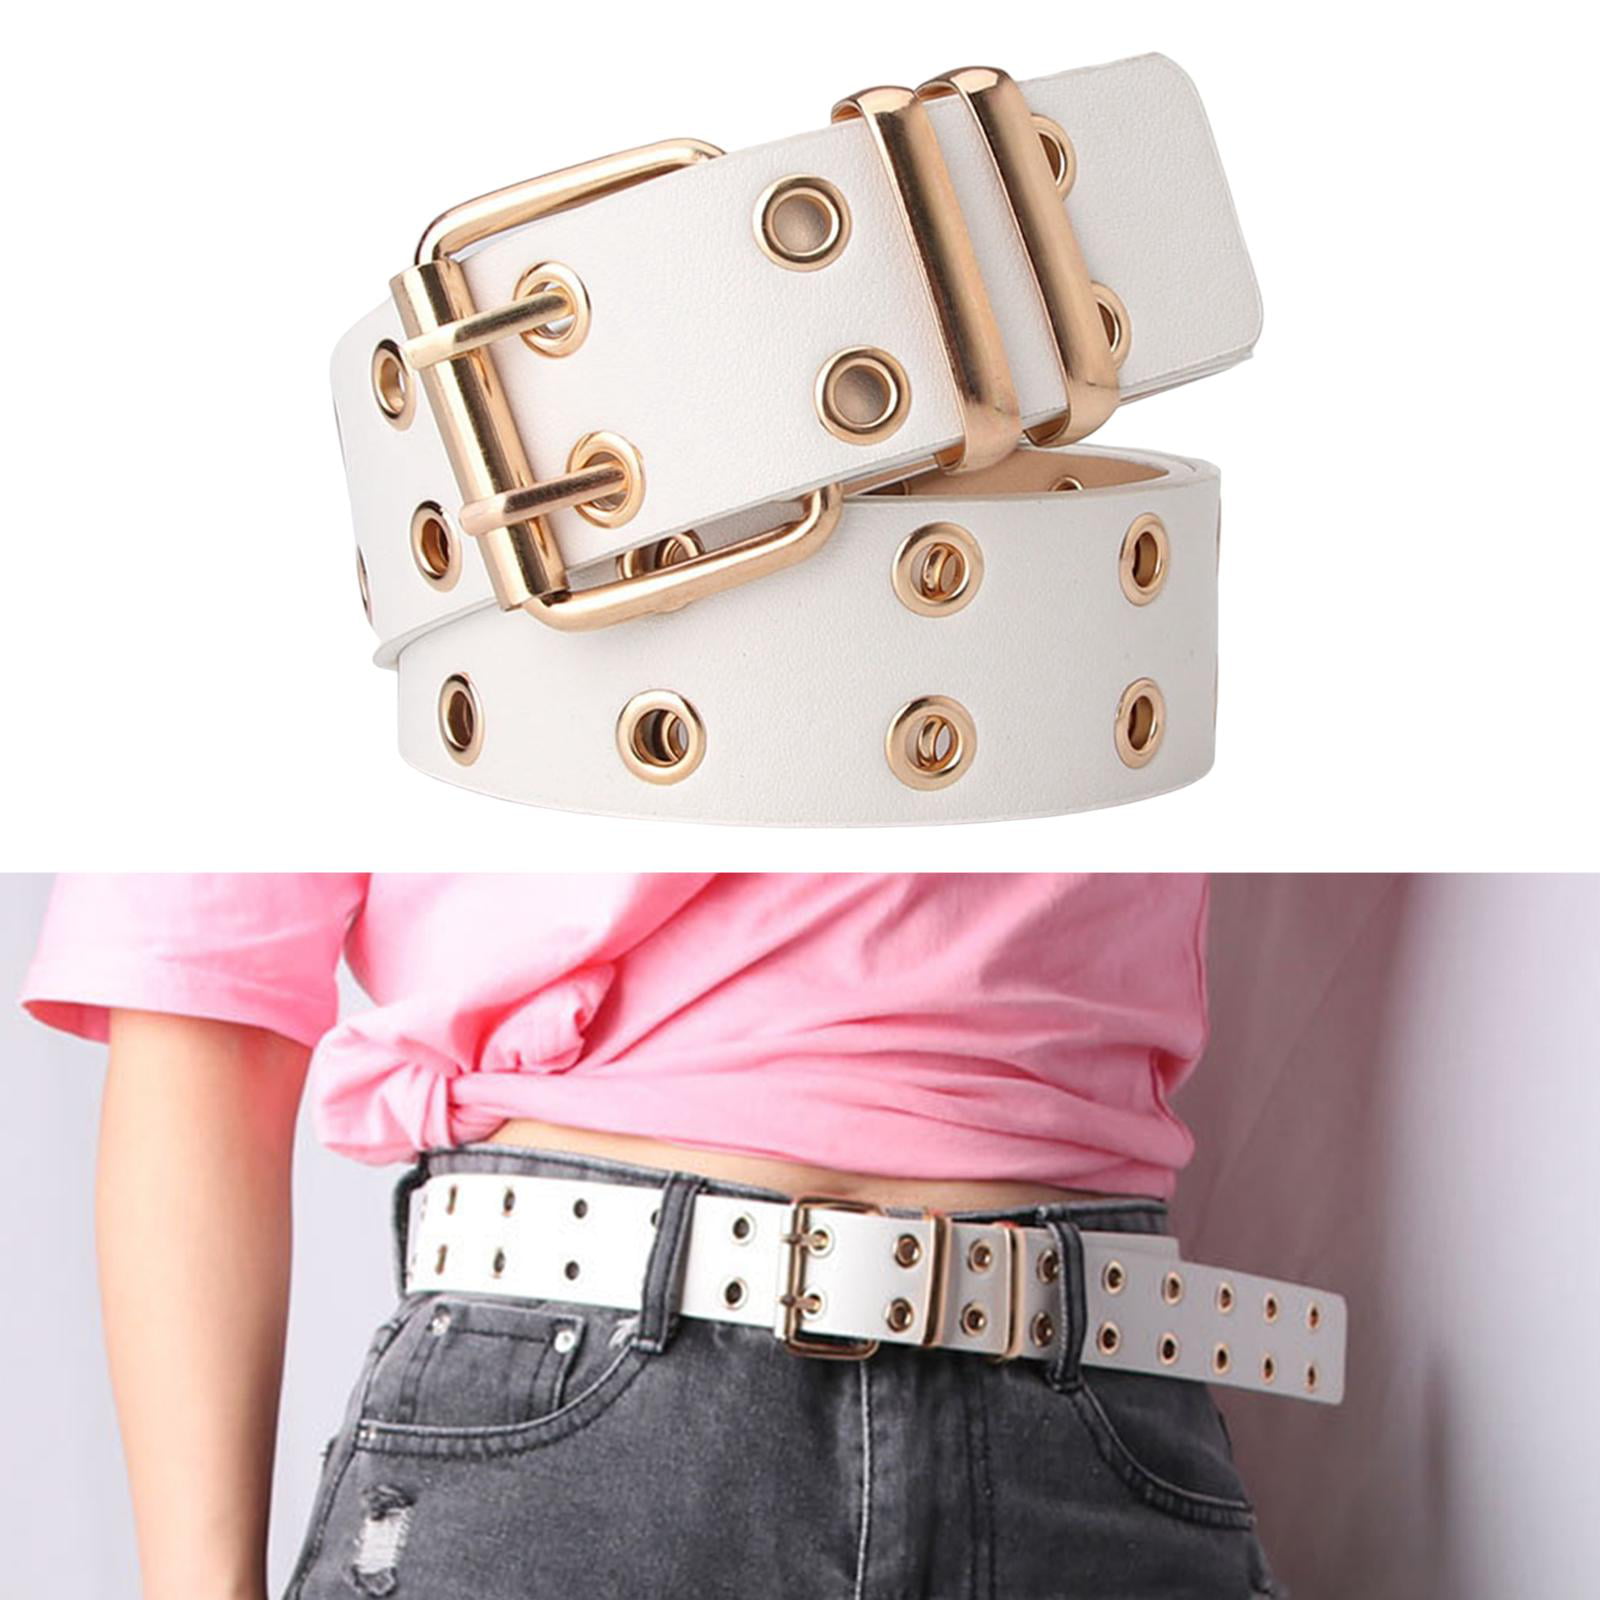 Double Grommet Punk Belt, Vintage Gothic Adjustable Eyelet White Accessories, Jeans. Fashion for , with Hollow Leather Pants PU